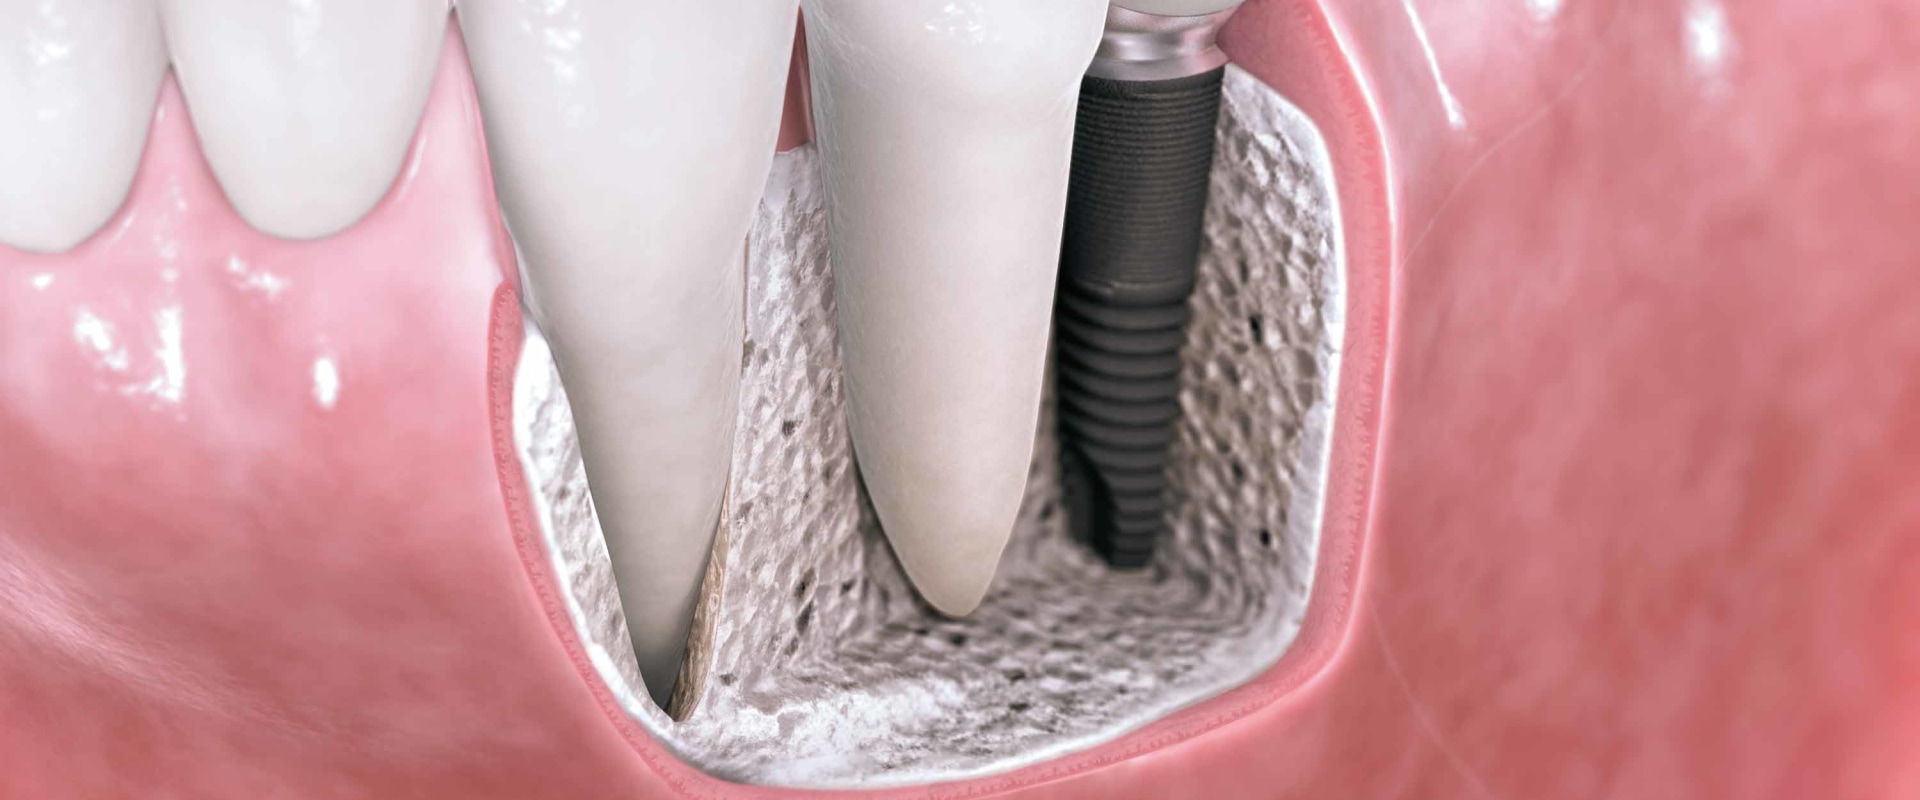 What does the dental implant look like?